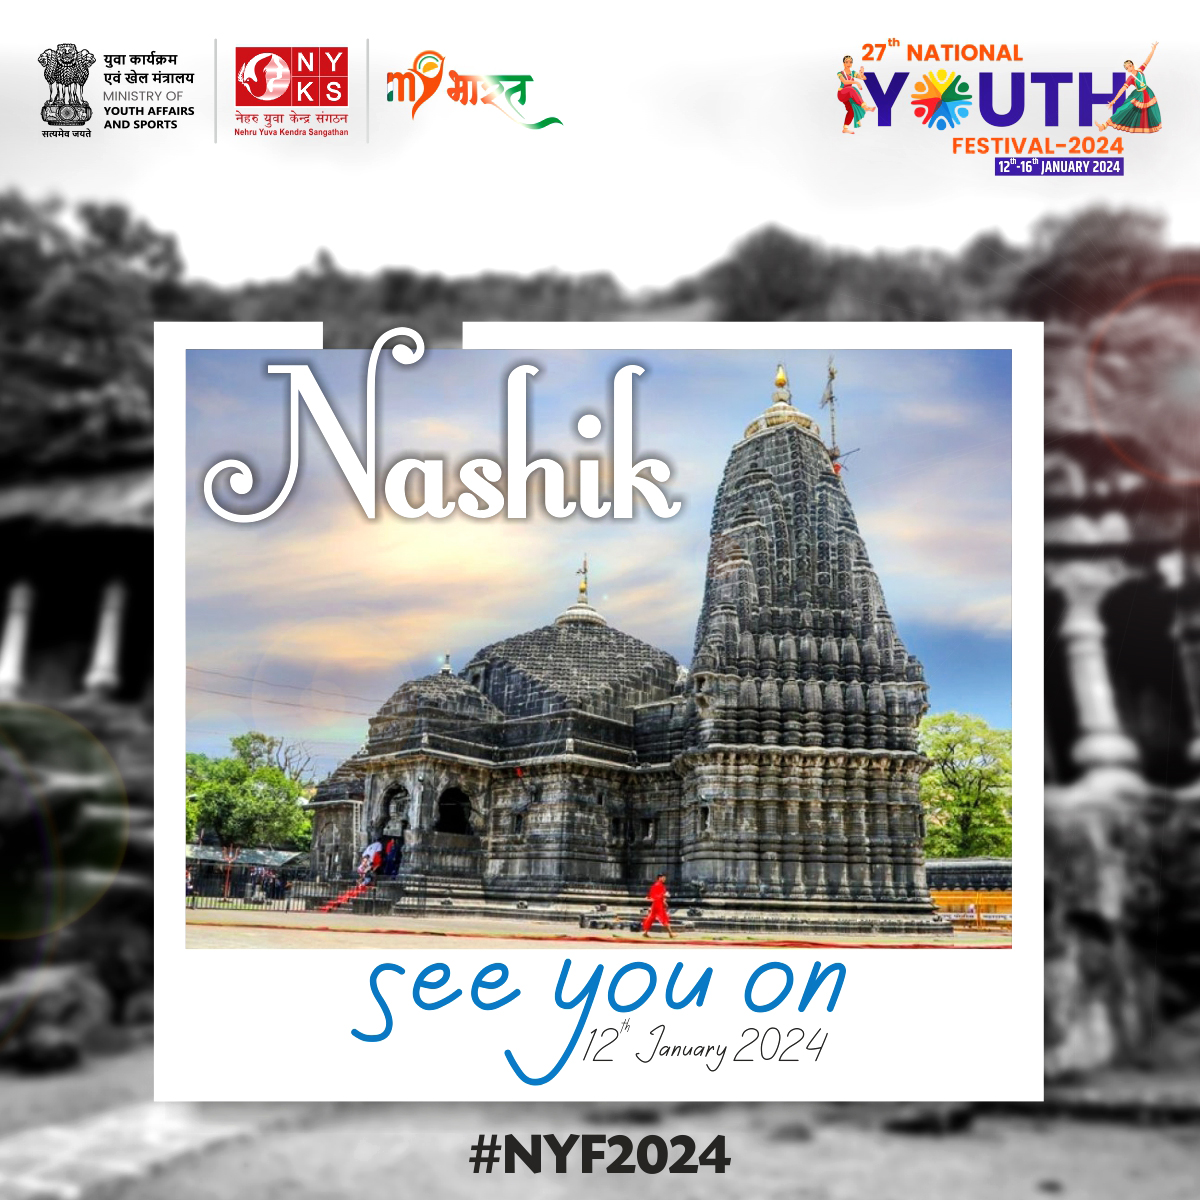 Ready to make memories? See you on 12th January at the 27th National Youth Festival in Nashik! Get set for a day filled with energy, enthusiasm, and empowerment! 💪🎊 #NYF2024 #SaveTheDate #NationalYouthFestival #NYKS